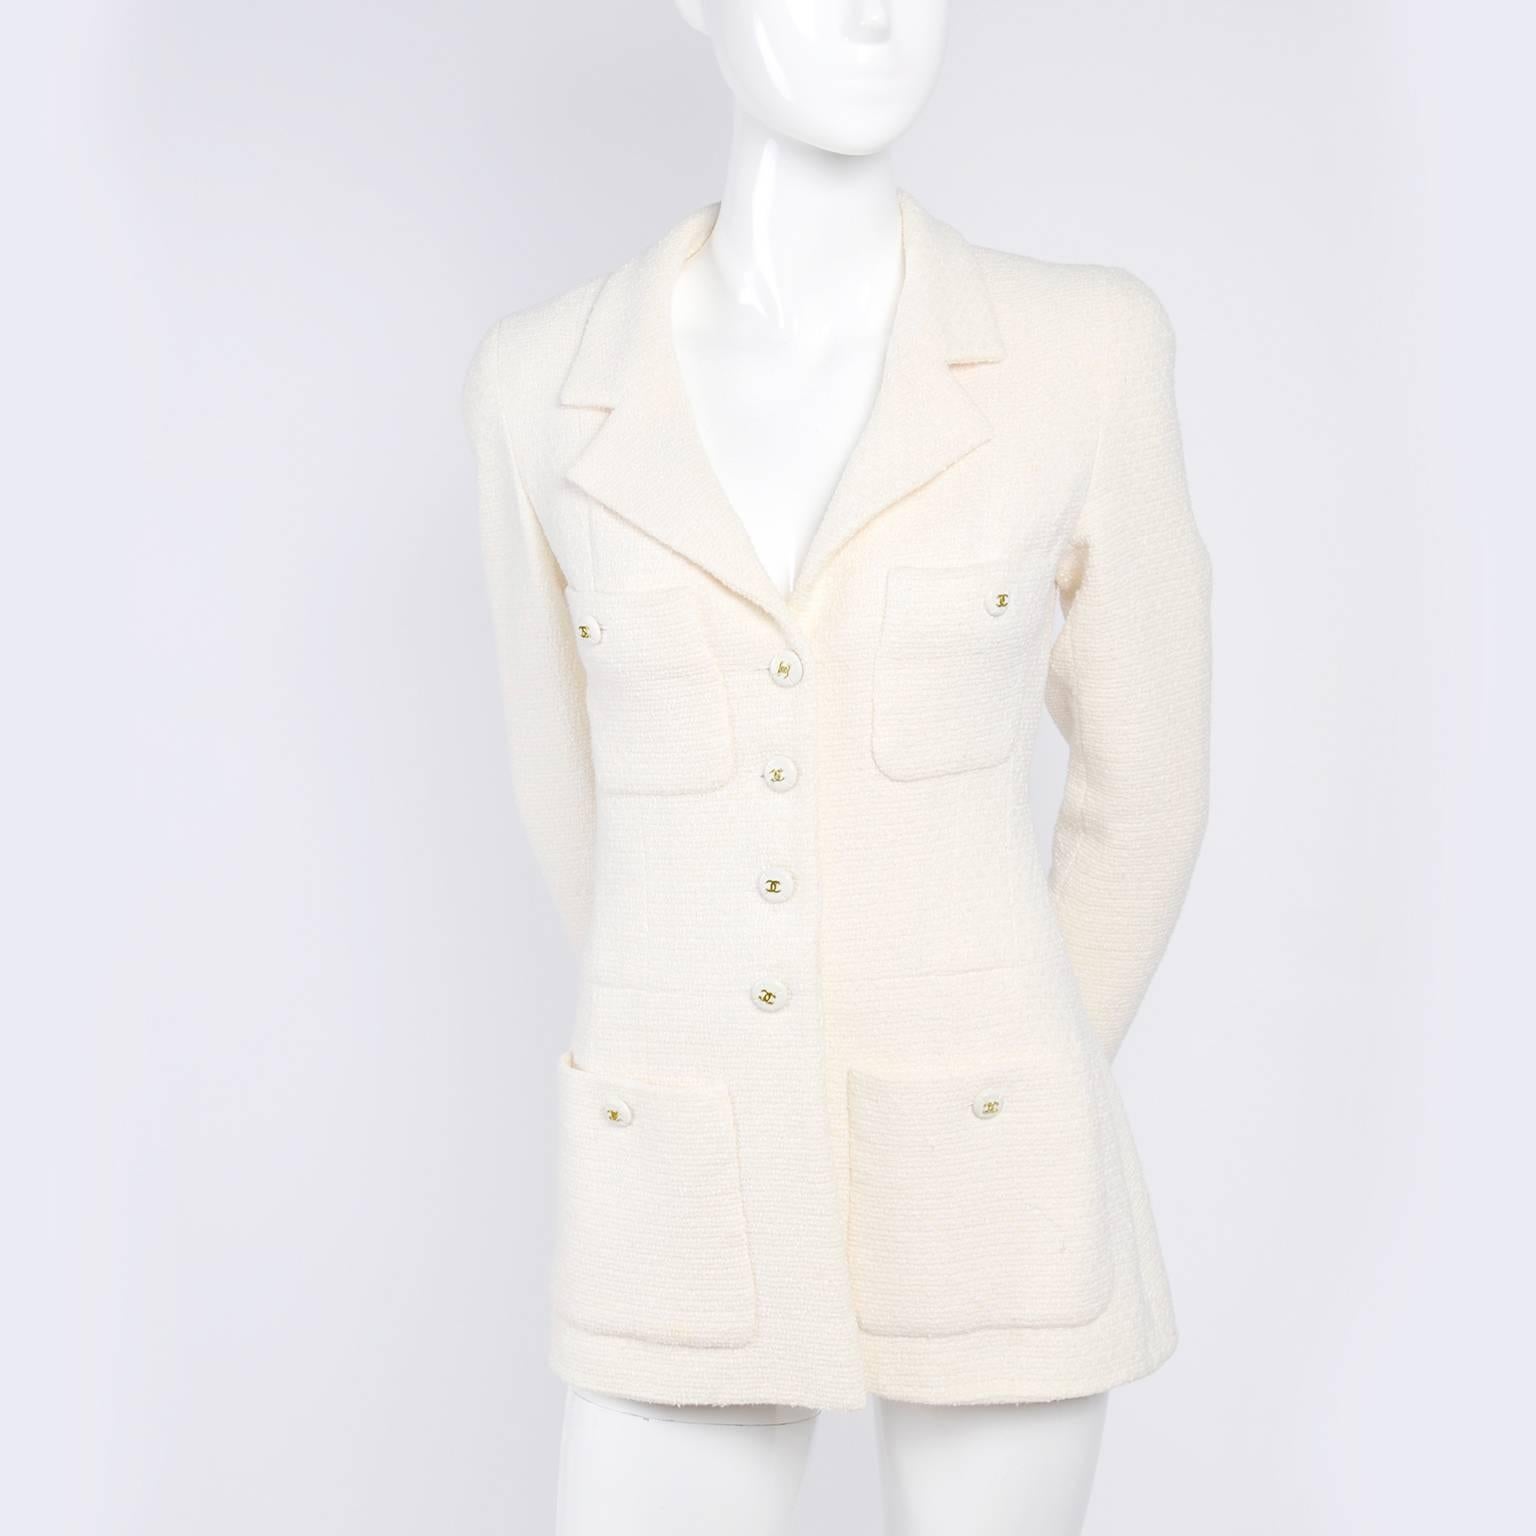 This is an absolutely gorgeous vintage Chanel blazer or jacket with CC logo buttons and tone on tone CC logo printed silk lining.  The jacket is in an ivory, almost cream wool blend fabric and it has 4 front pockets and a notched collar.  This